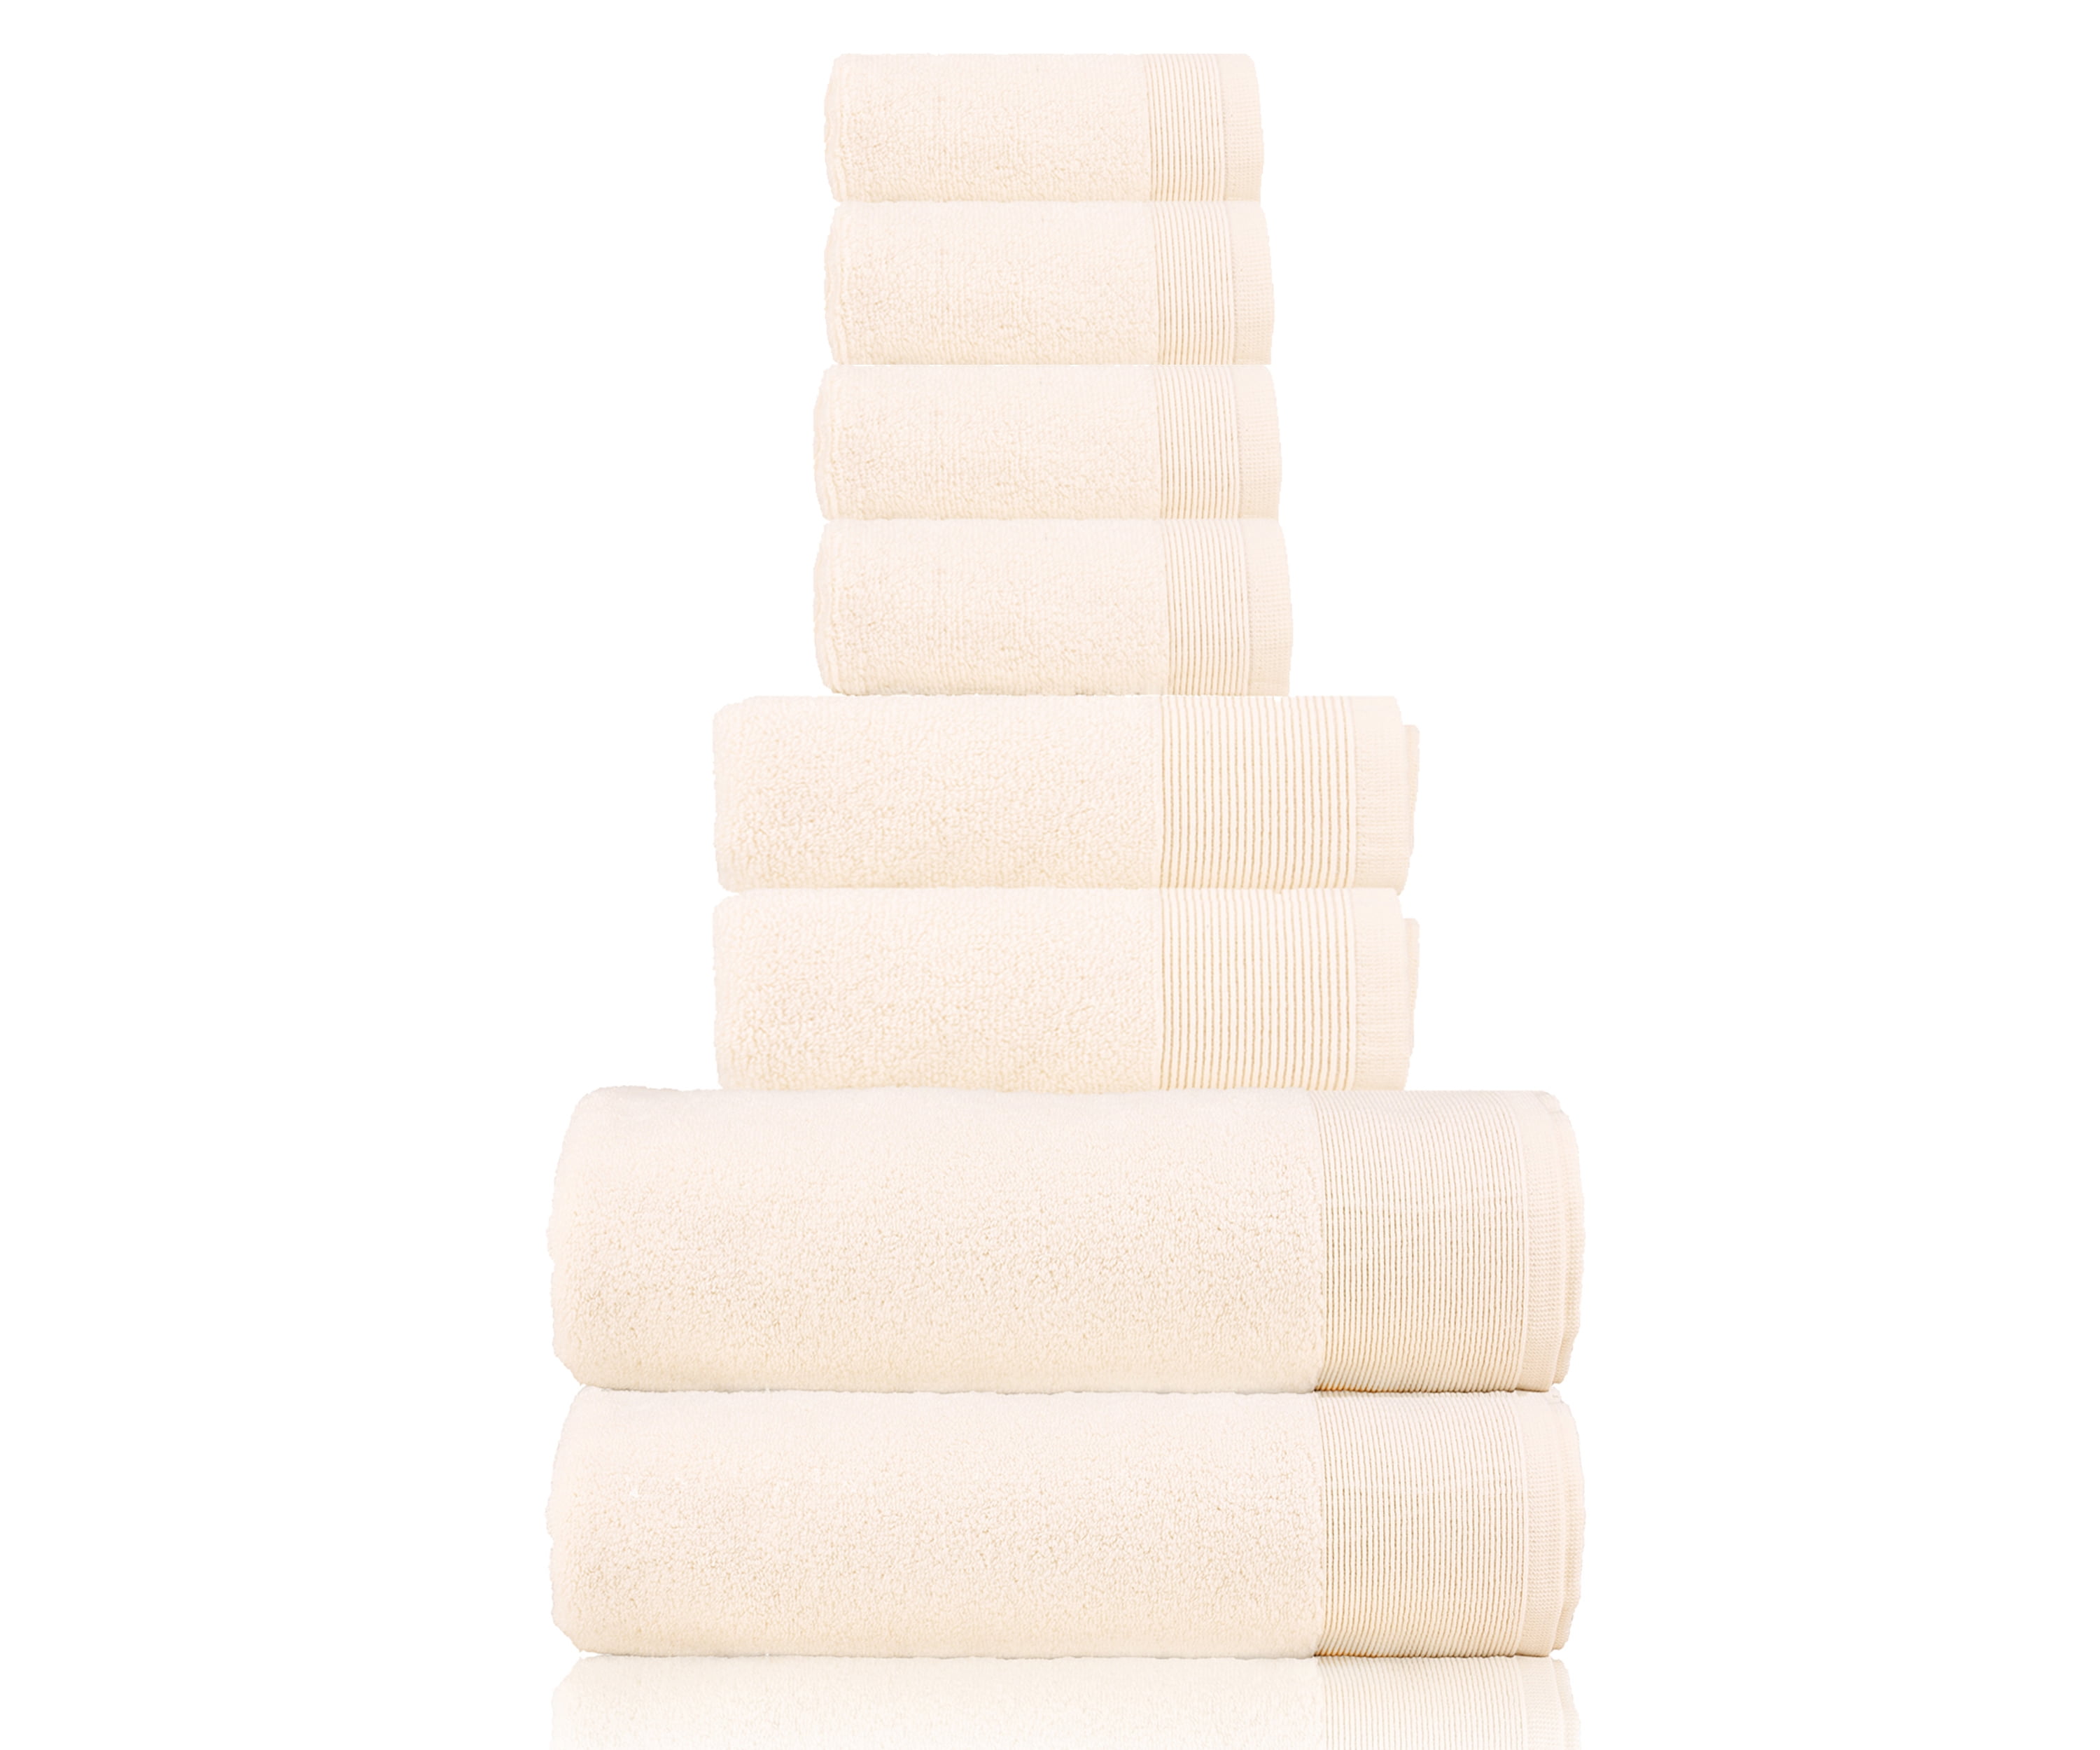 Premium Quality Face Cloths Cream Extremely Absorbent and Extra Soft 6-Pack Fabstyles Cotton Face Towel Set - 100% Zero Twist 600 GSM Cotton